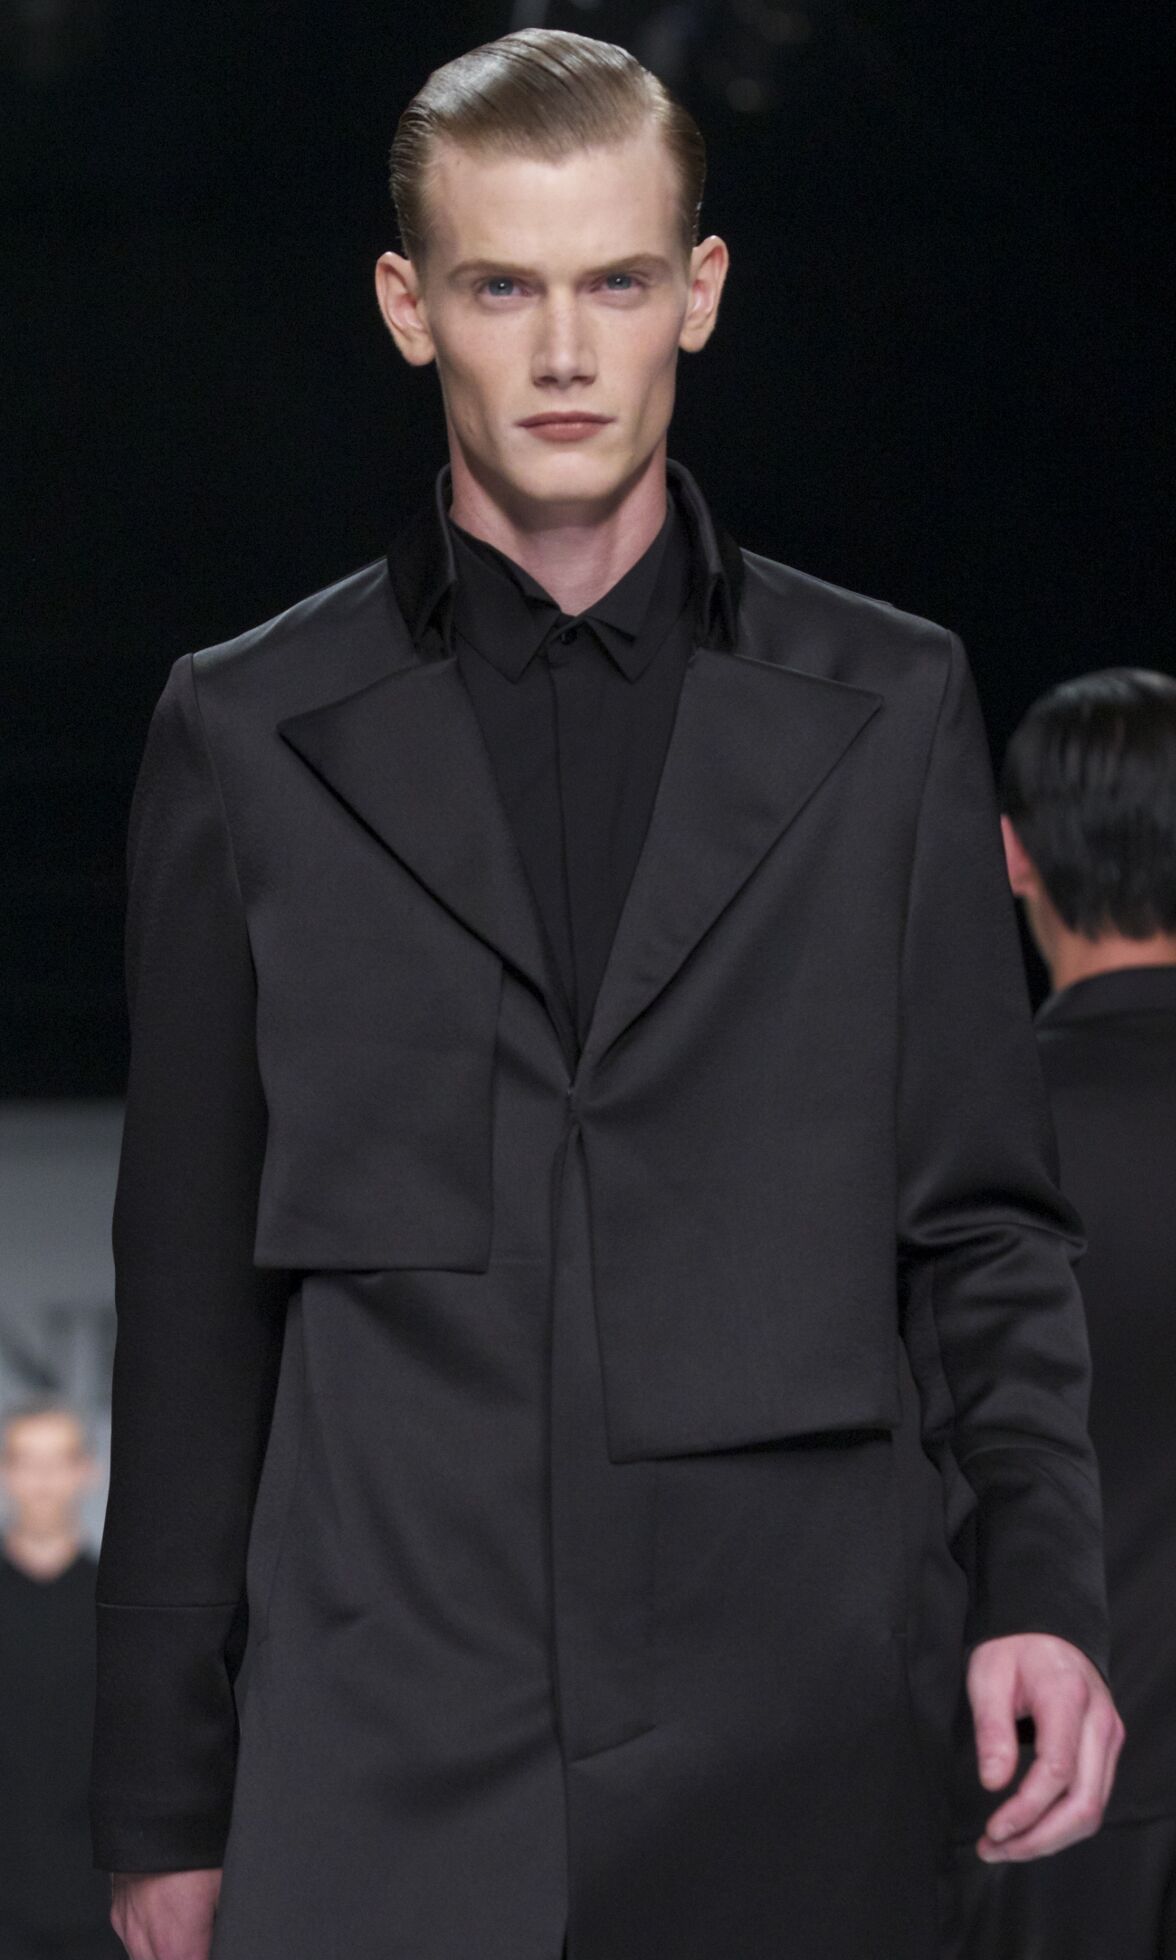 JI WENBO SPRING SUMMER 2014 MEN’S COLLECTION | The Skinny Beep